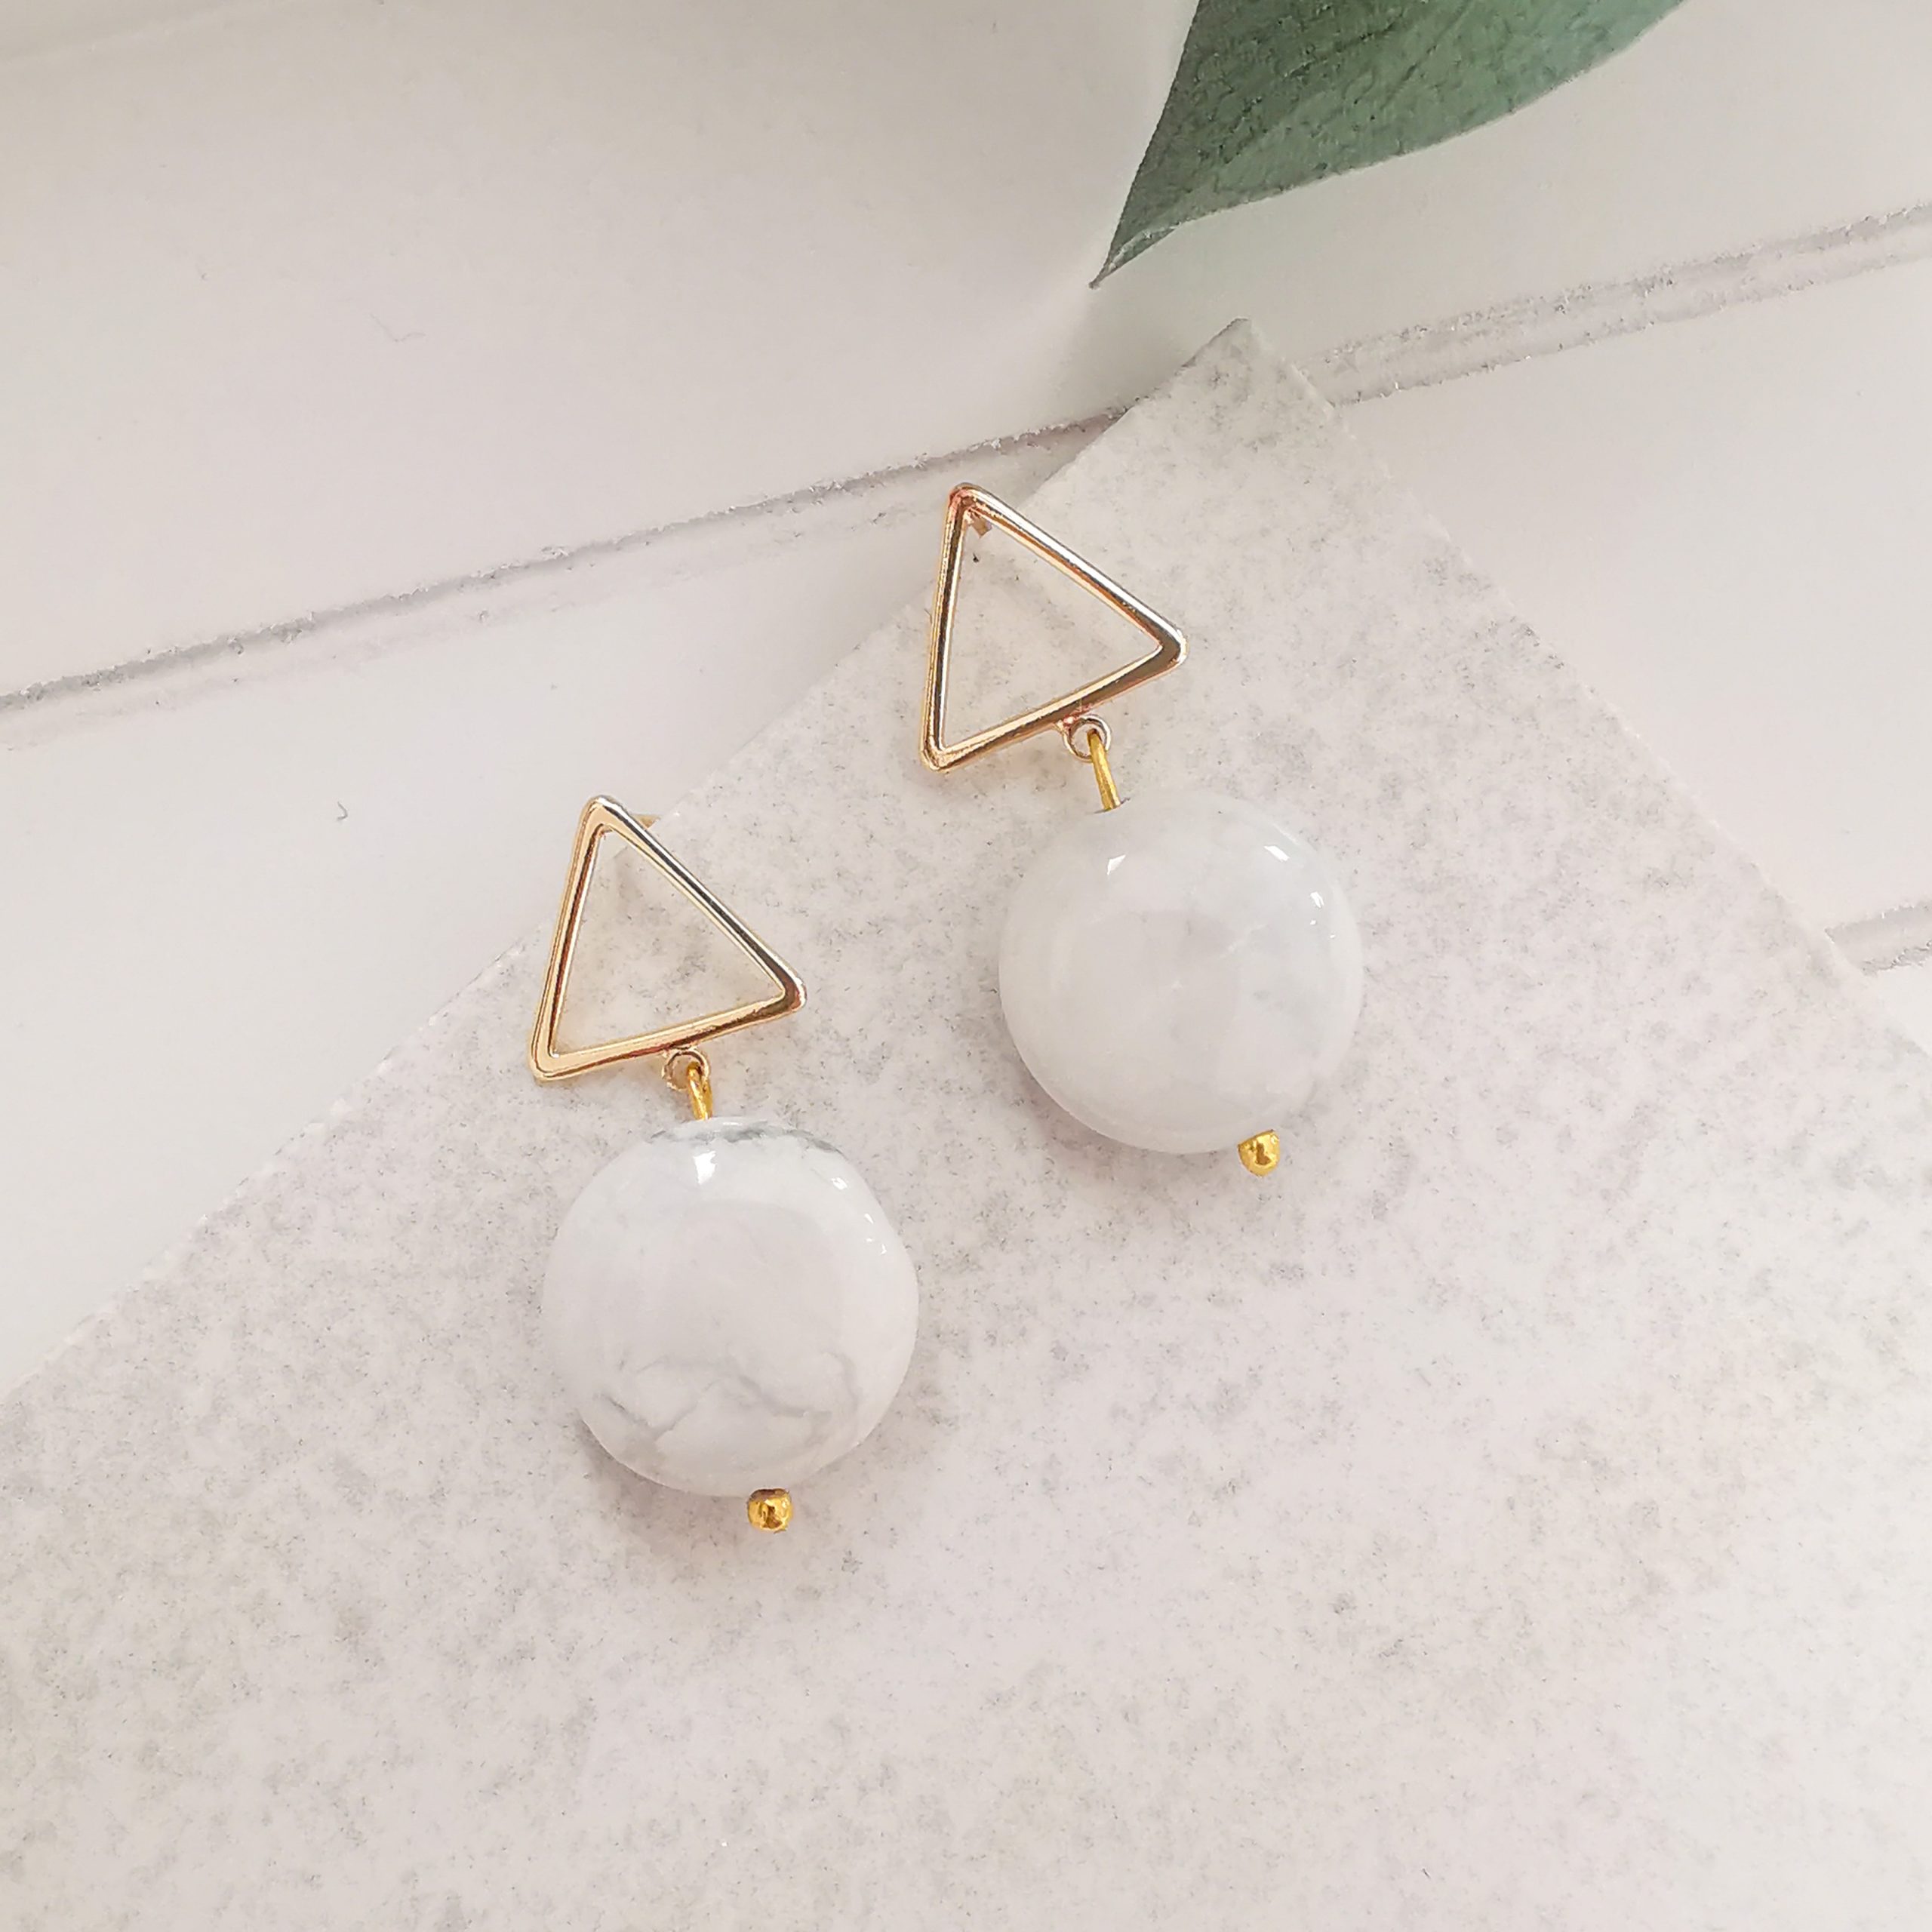 AccentsUK 18K Gold Plated White Marble Stone Earrings